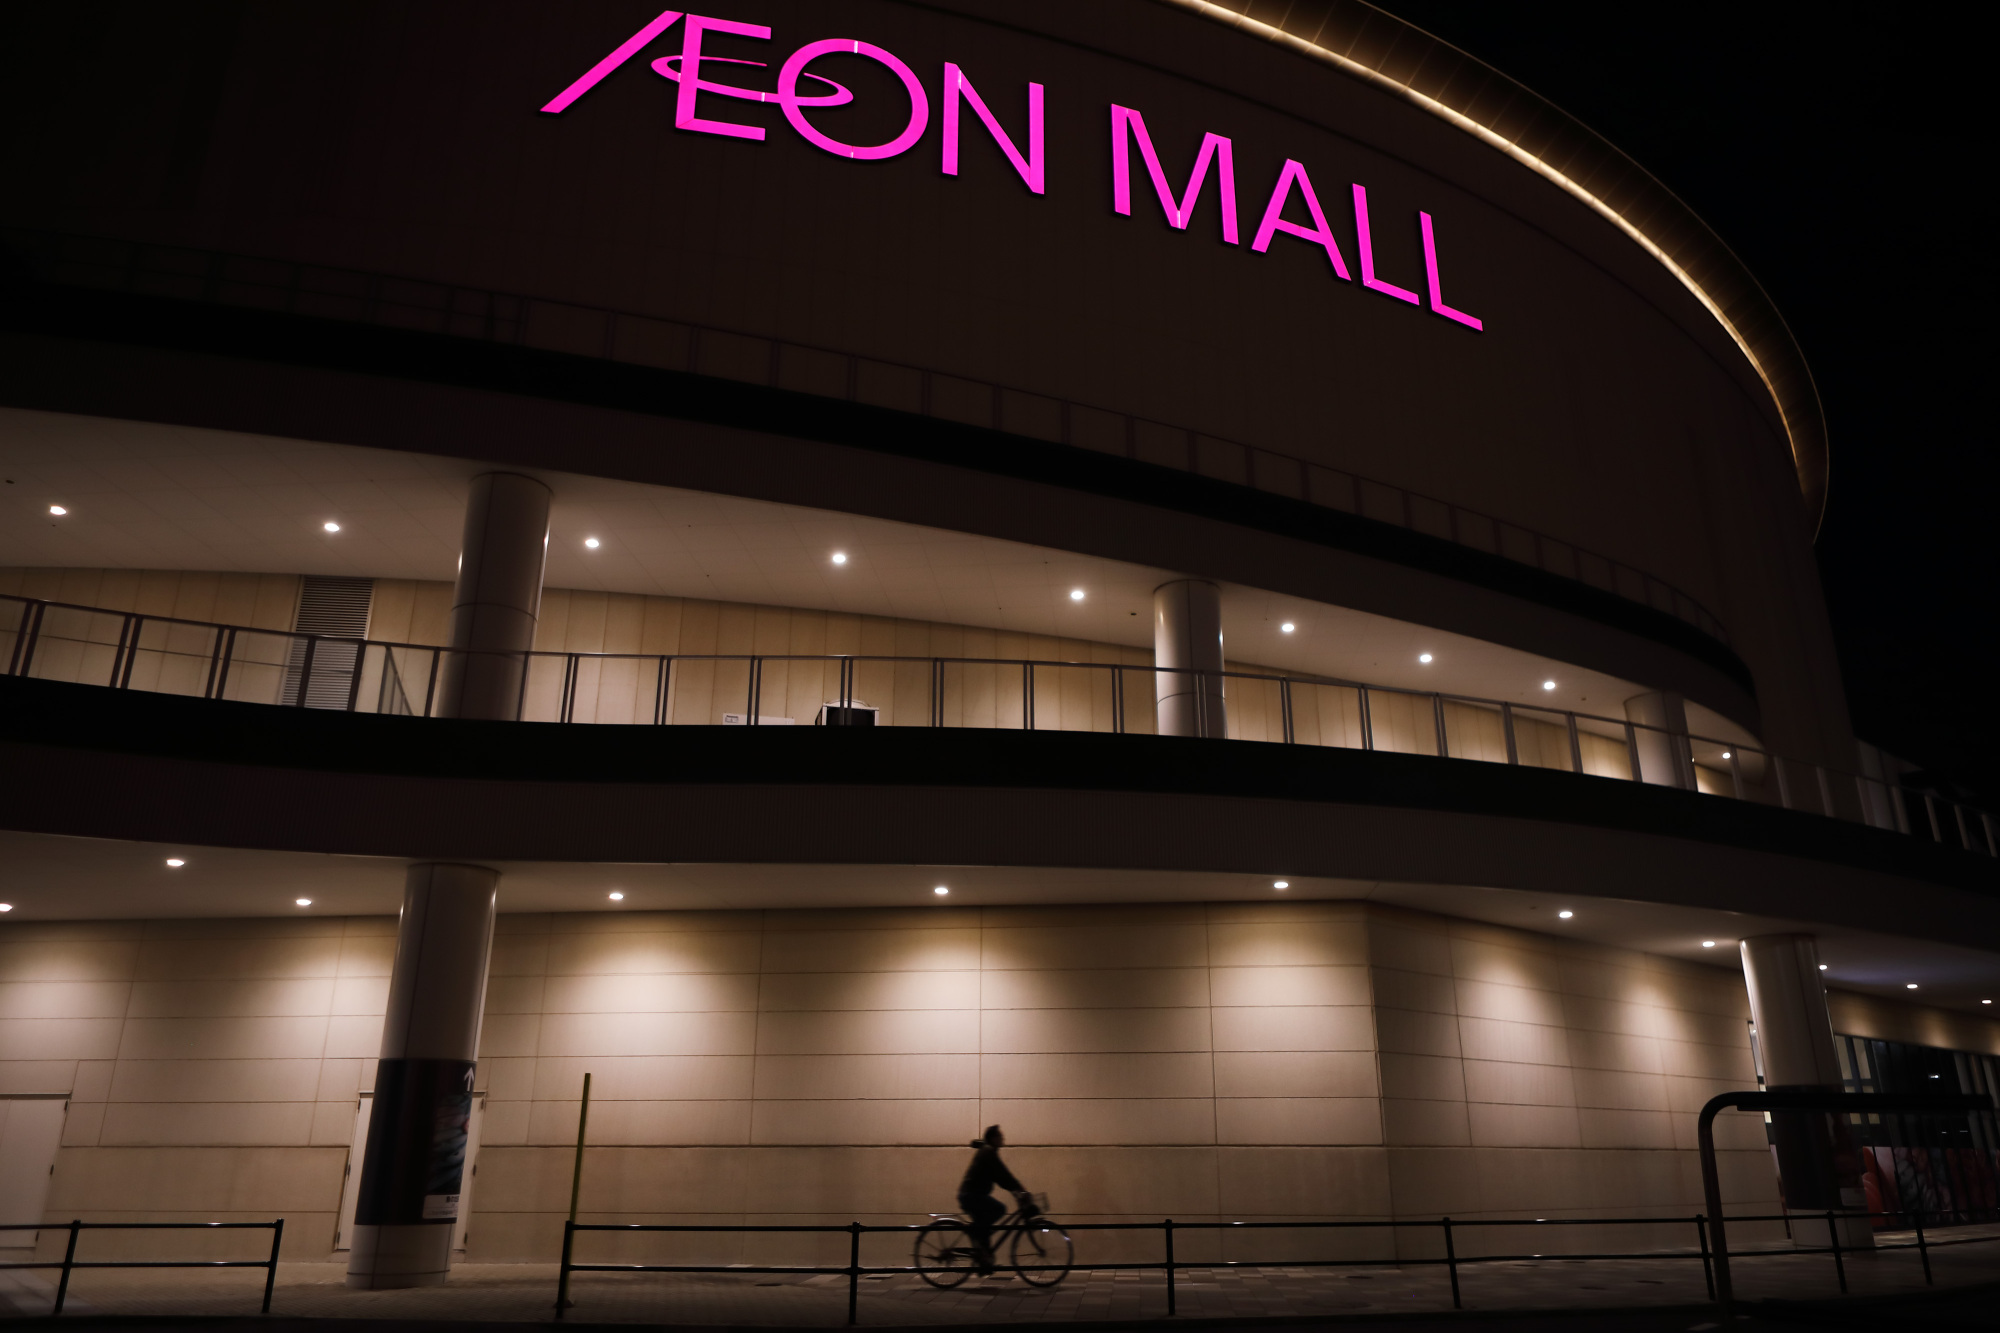 A woman rides past an Aeon shopping mall in Chiba in January 2018. | BLOOMBERG